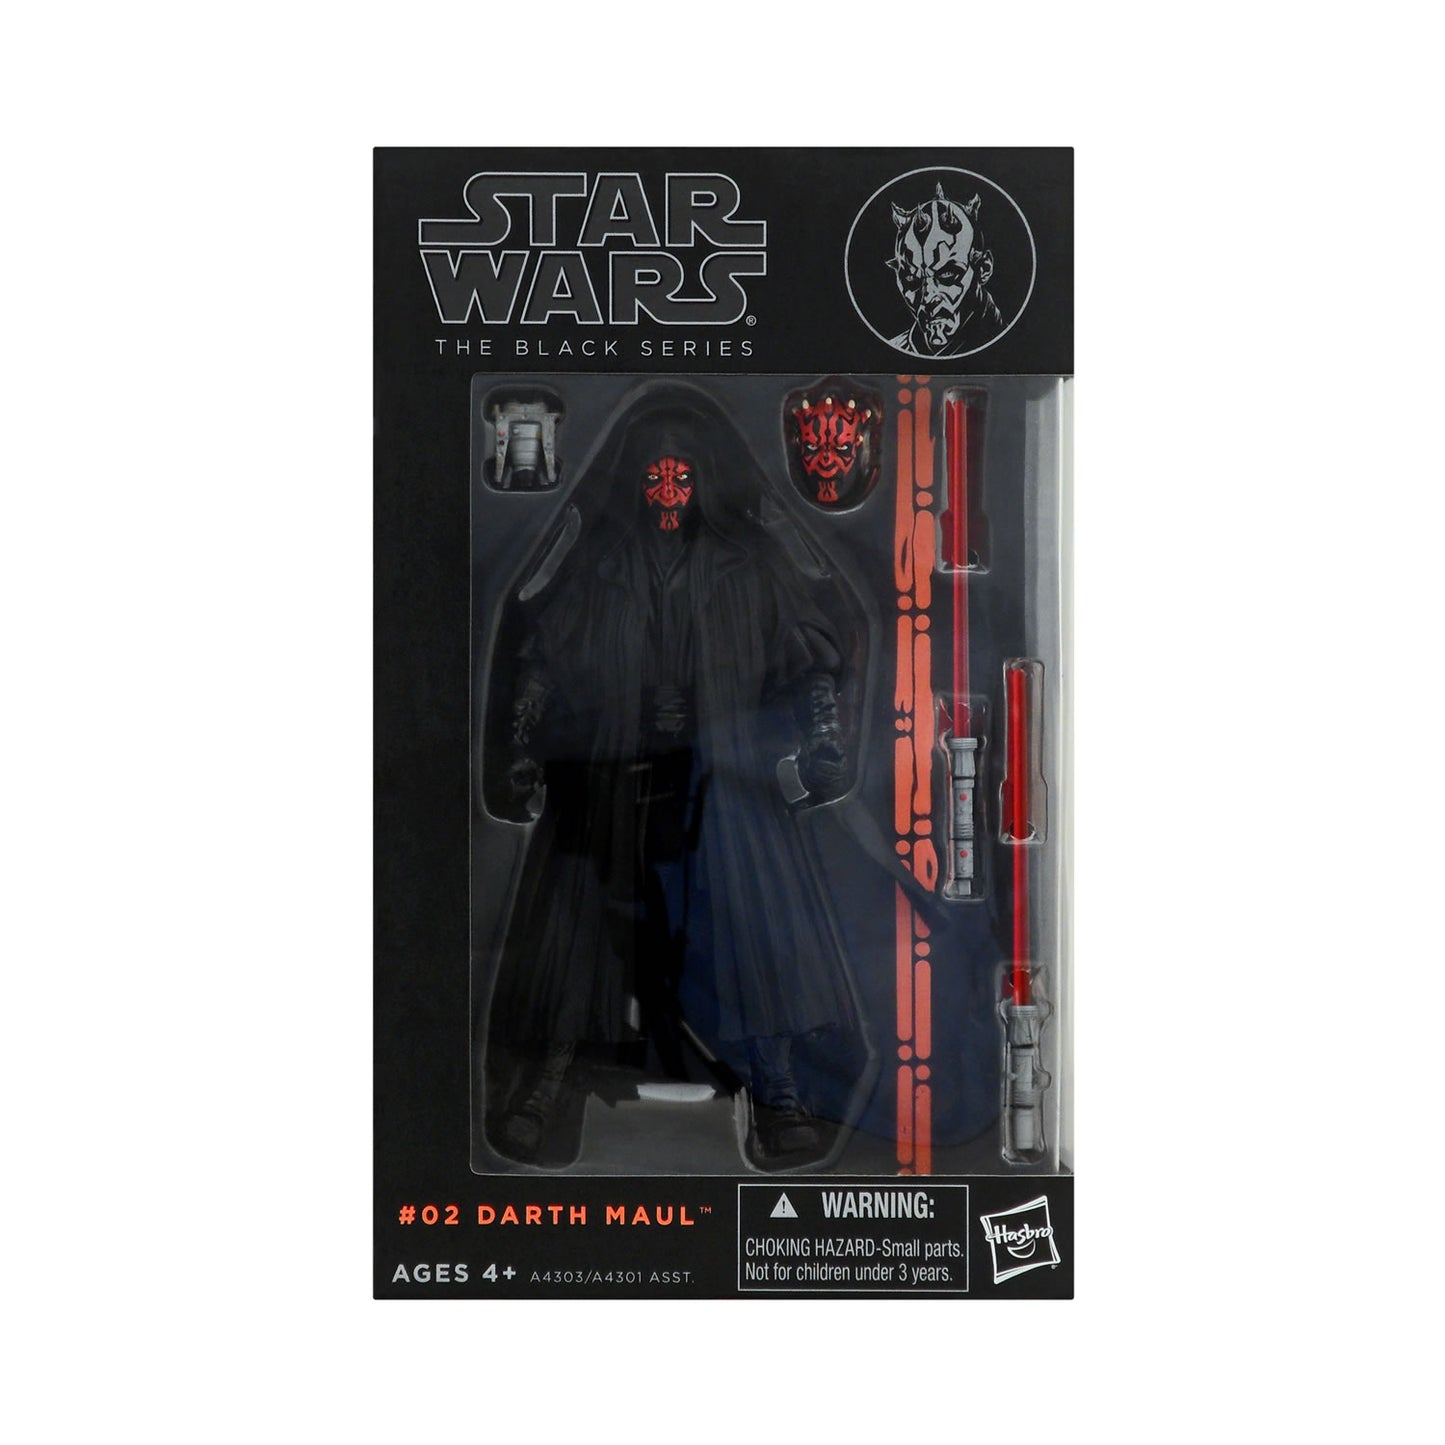 Star Wars: The Black Series Darth Maul 6-Inch Action Figure (2013)